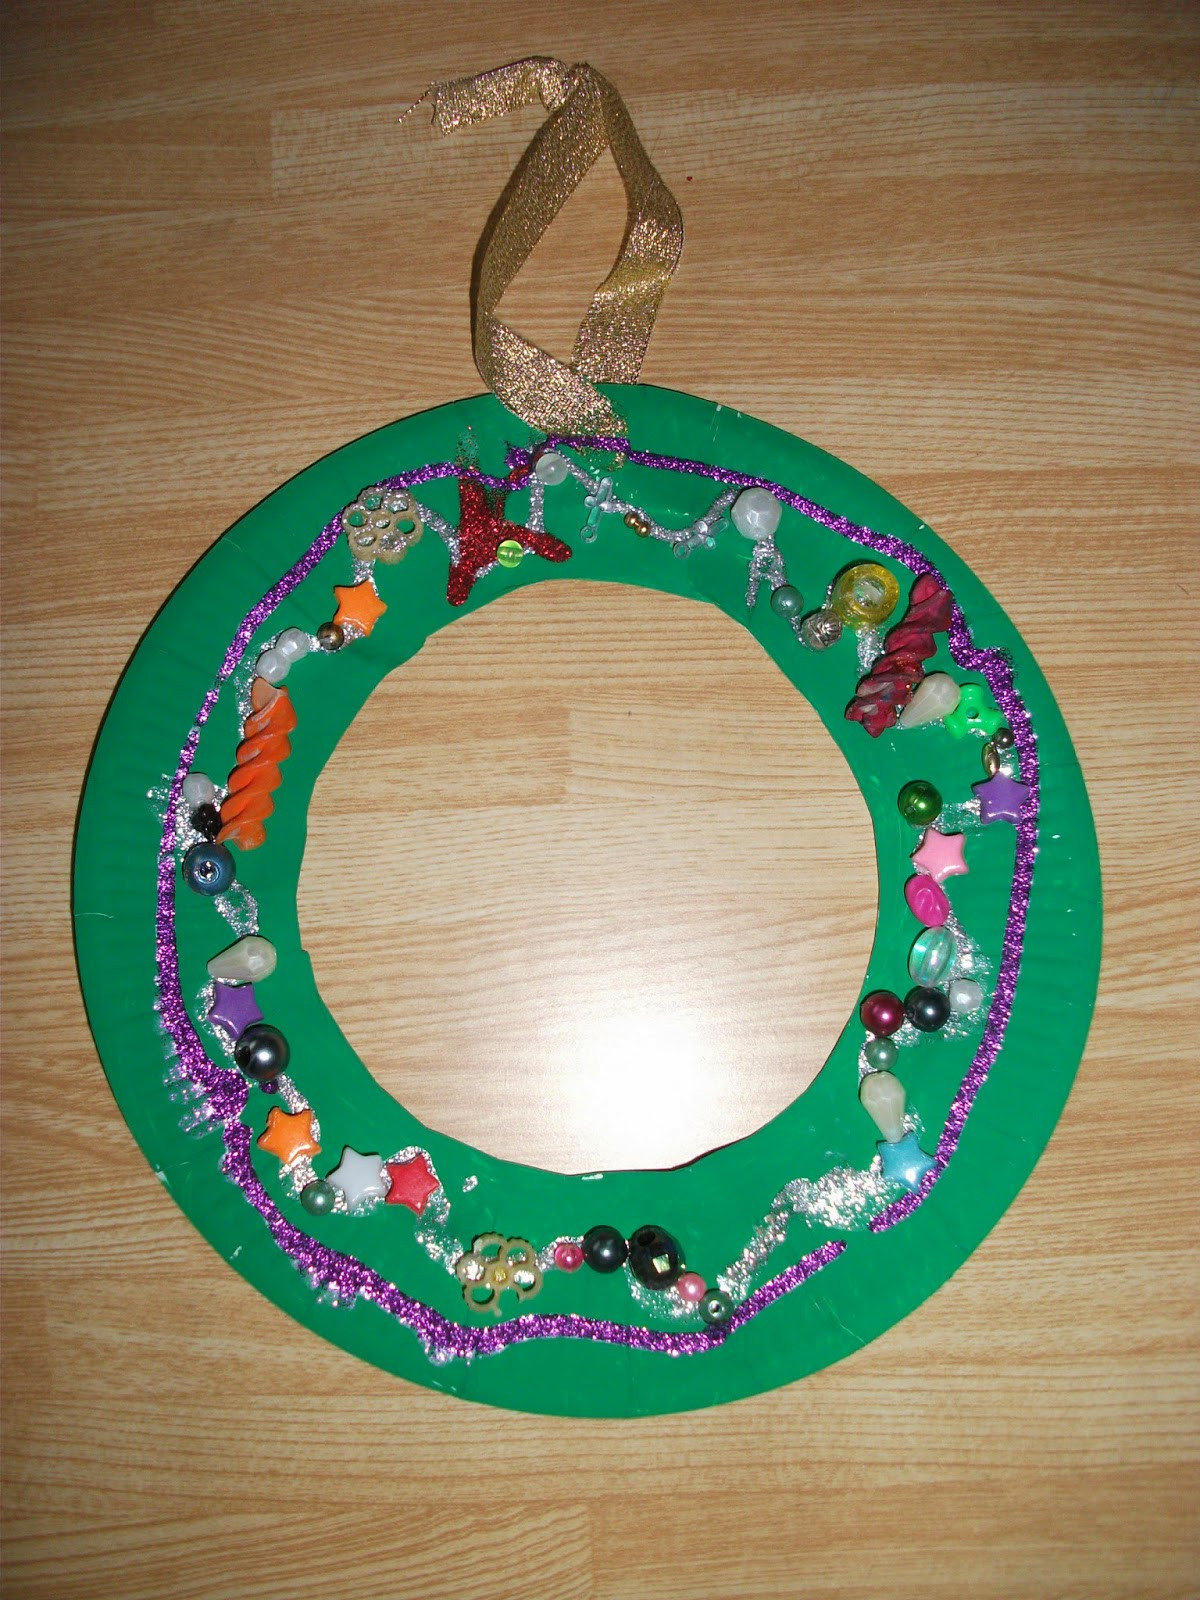 Wreath Craft For Kids
 Preschool Crafts for Kids Paper Plate Christmas Wreath Craft